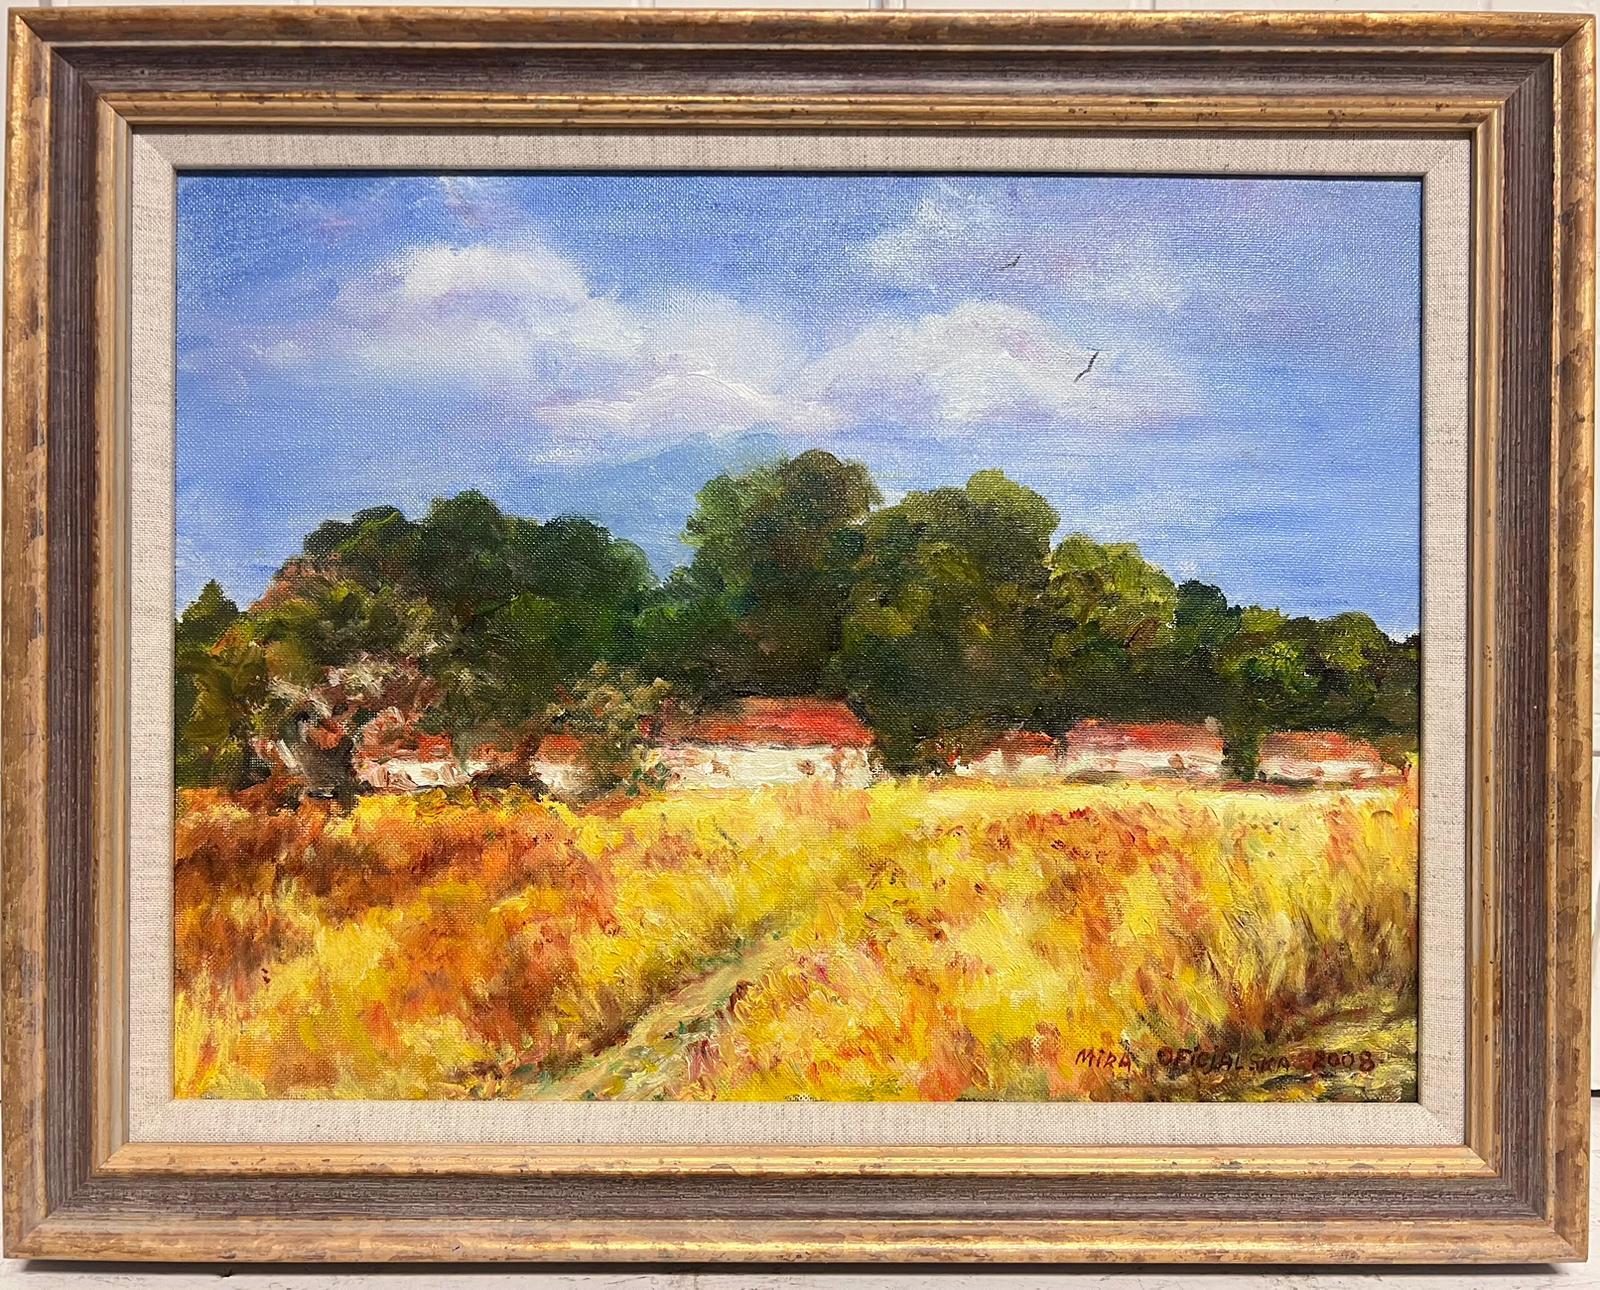 Hungarian Impressionist Landscape Painting - Cottages in Golden Harvest Field Signed & Dated 2008 Impressionist Oil Painting